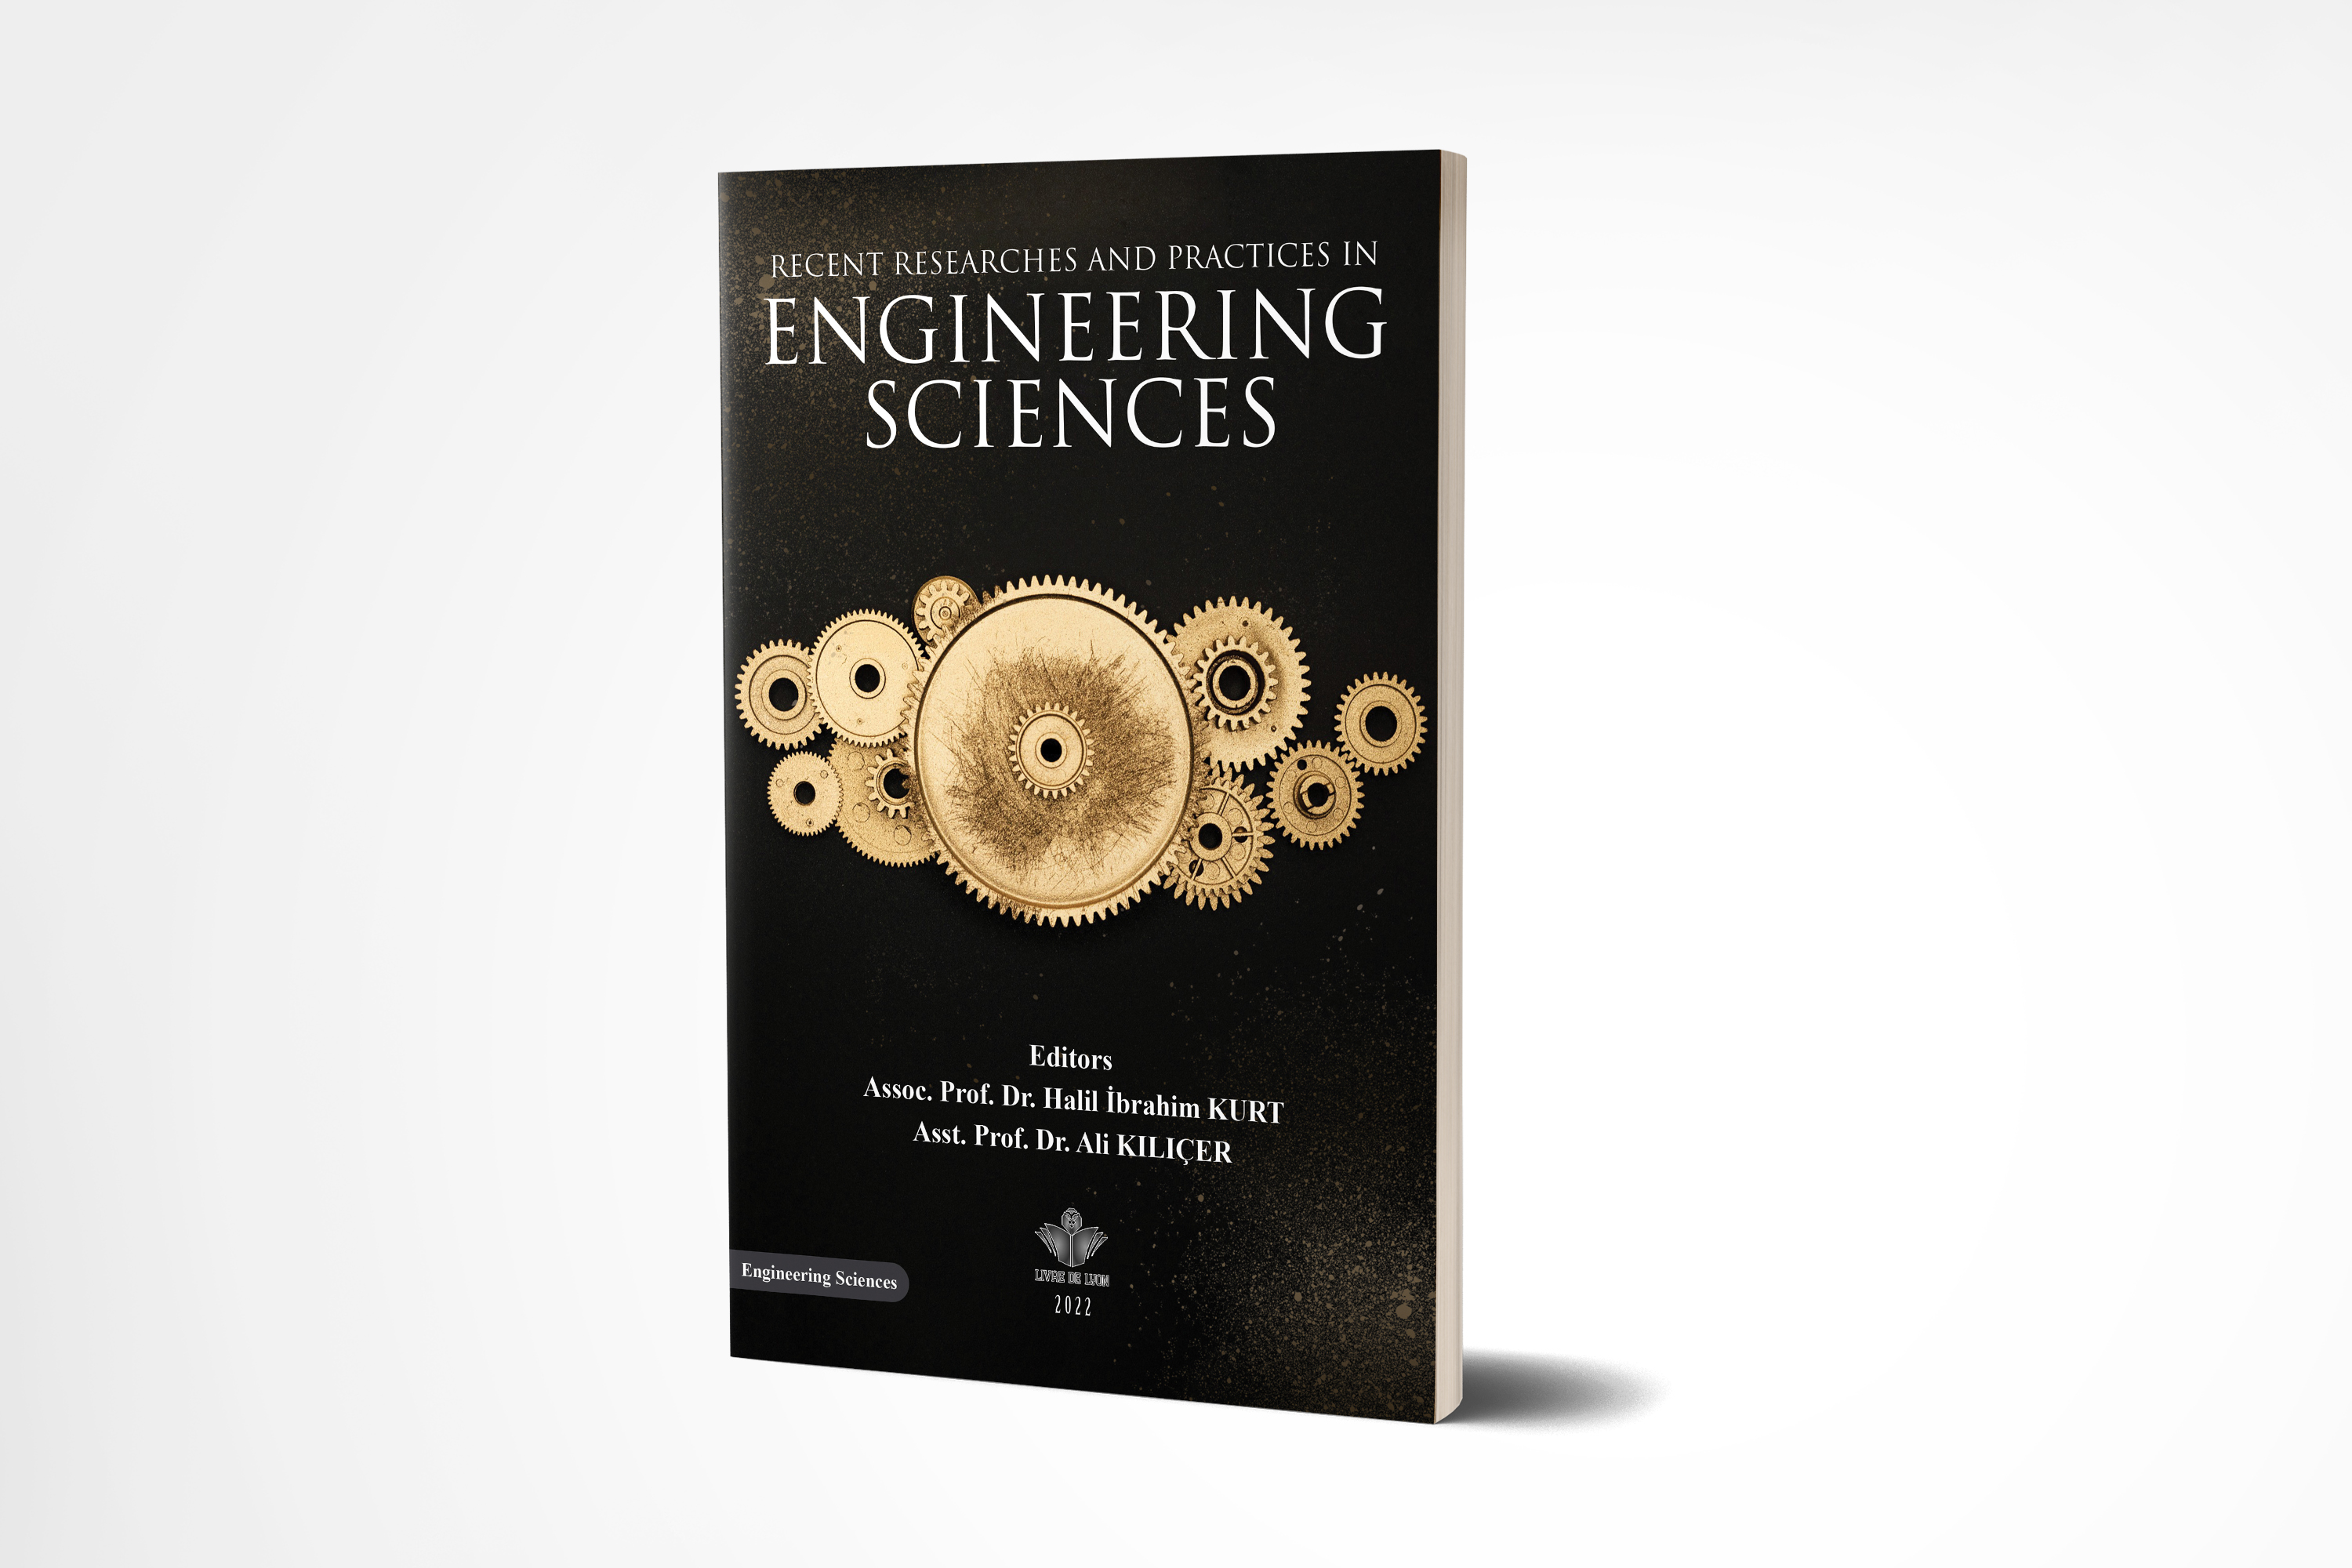 Recent Researches and Practices in Engineering Sciences